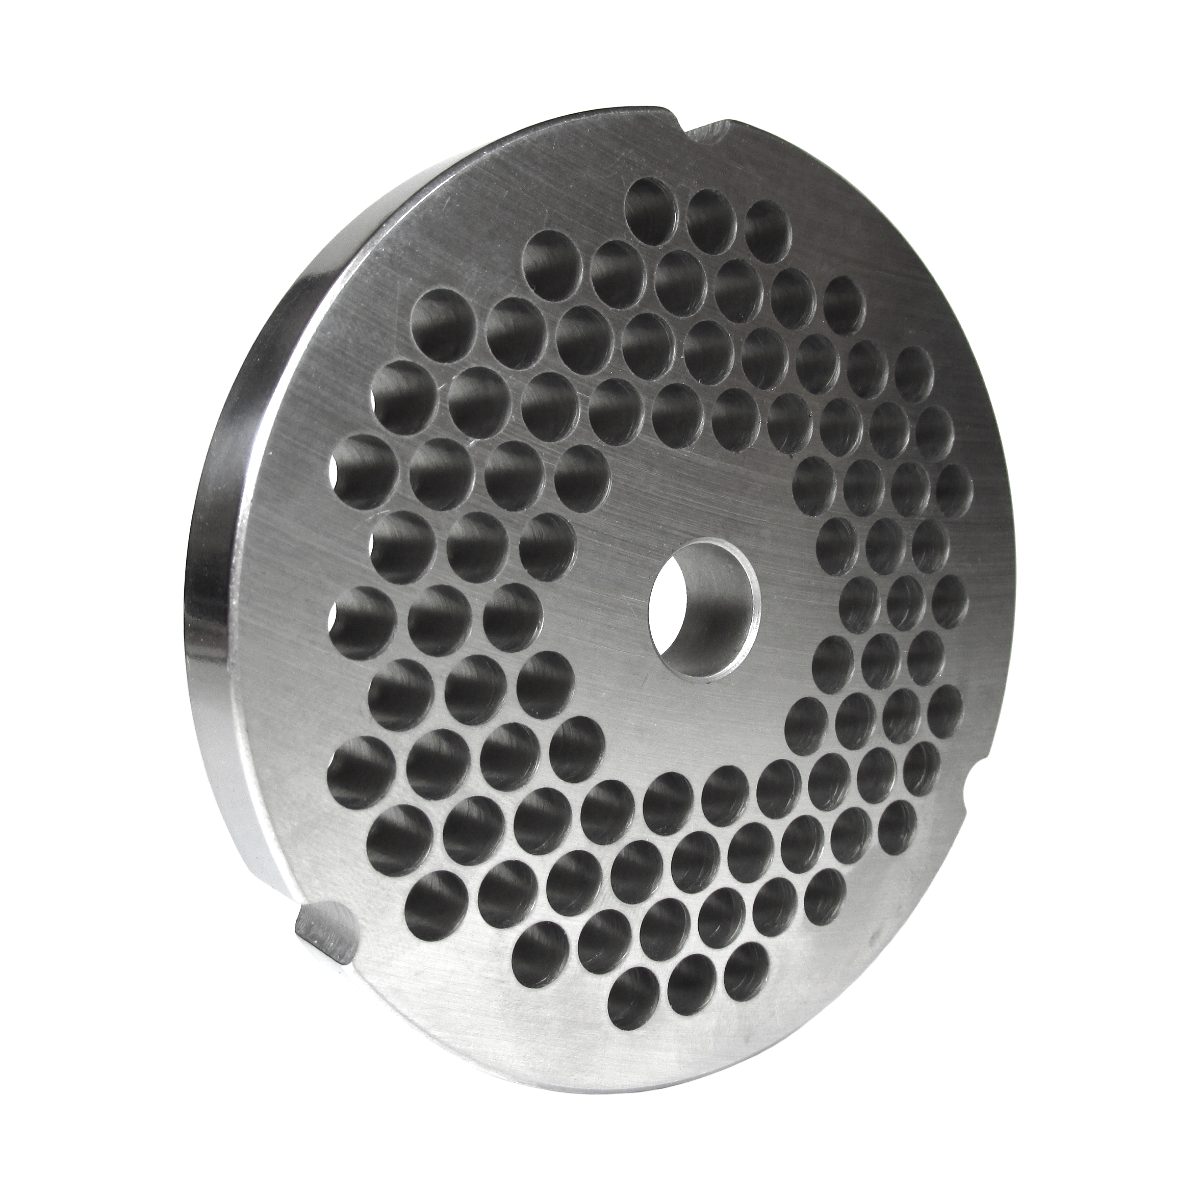 Grinder plate for #32 grinders with 1/4" hole, reversible